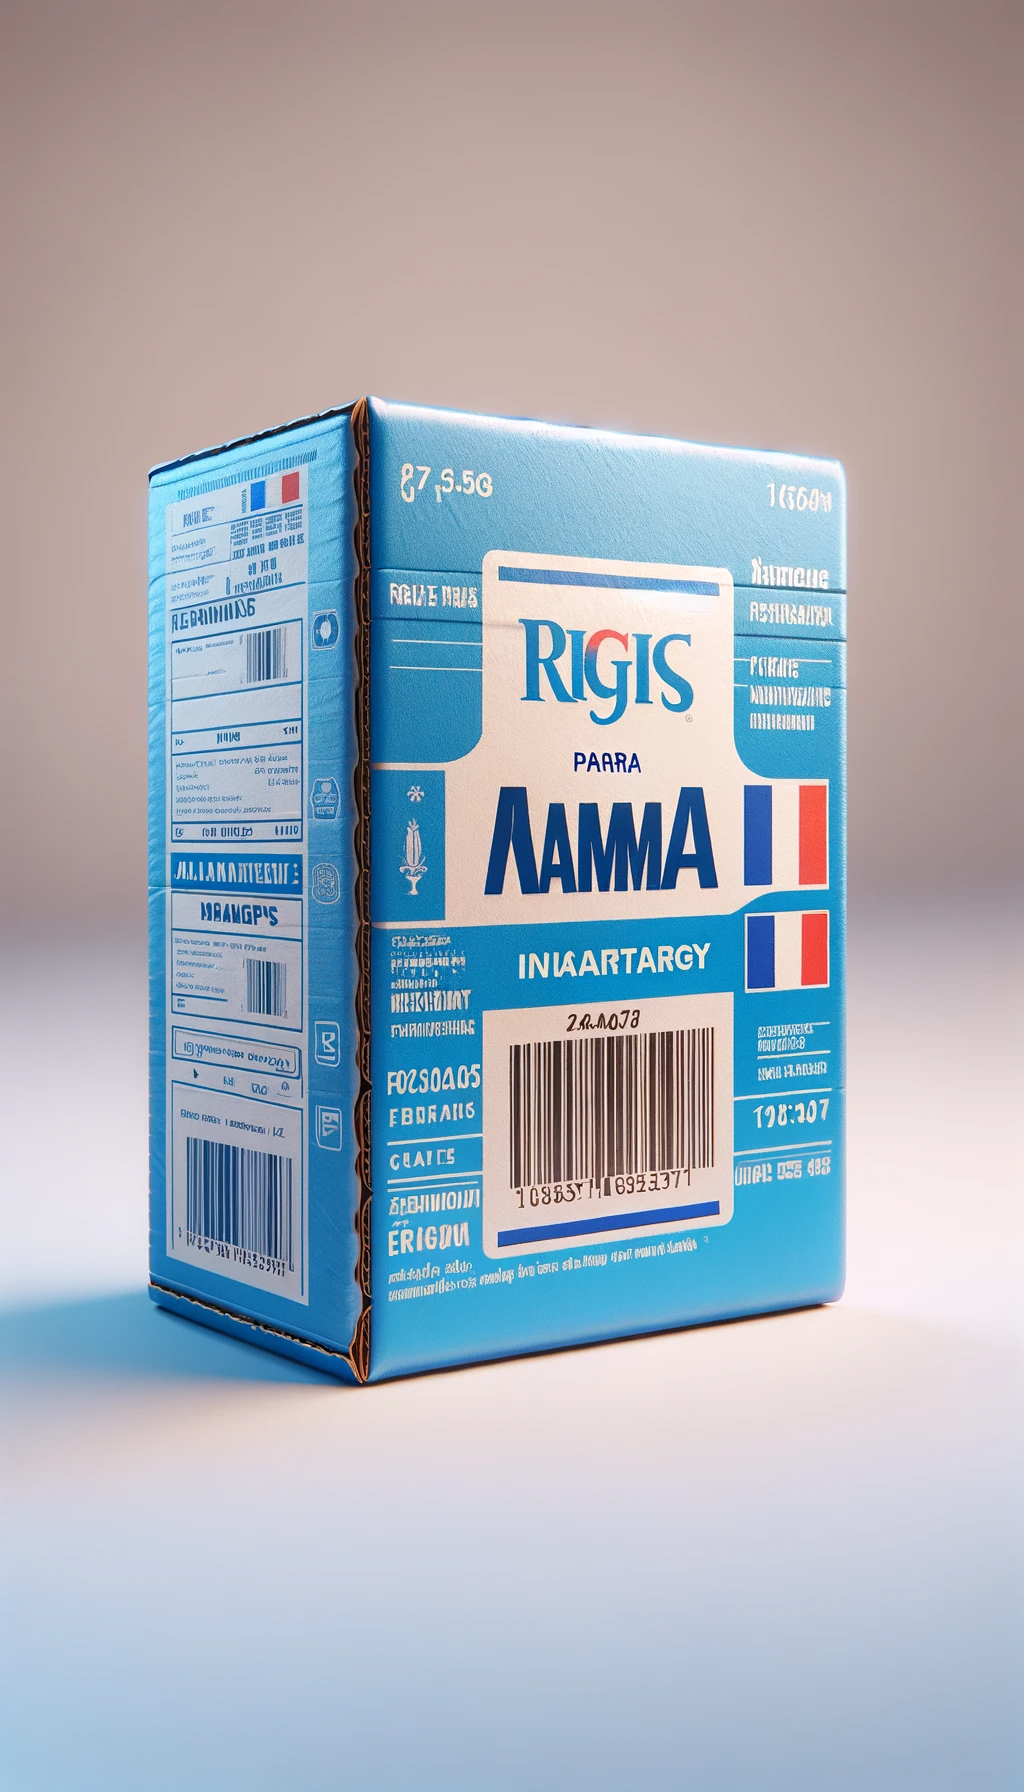 Achat kamagra oral jelly